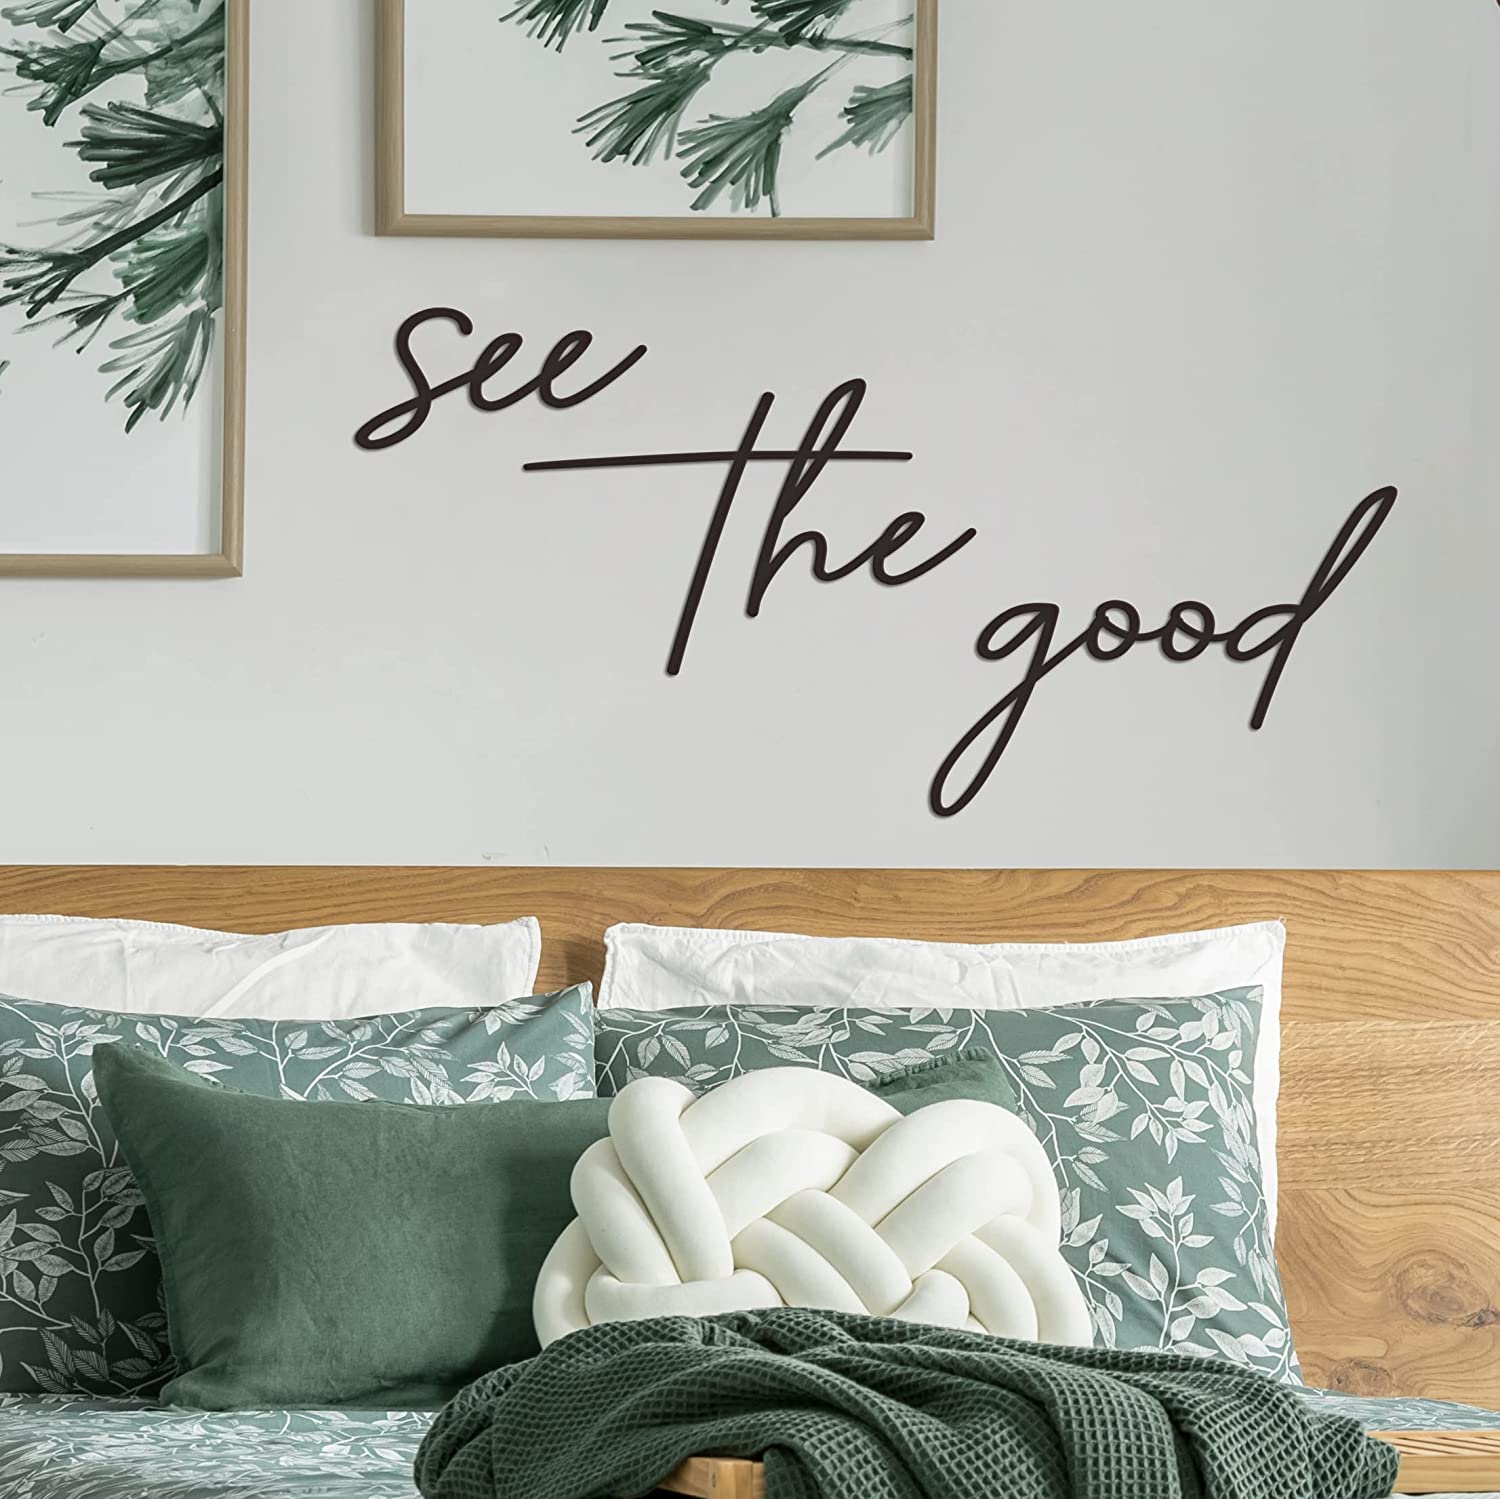 See The Good Wall Decor Metal Art - 29"x23" See The Good Sign Metal Cut Out Signs From Durable Powder-coated Metal